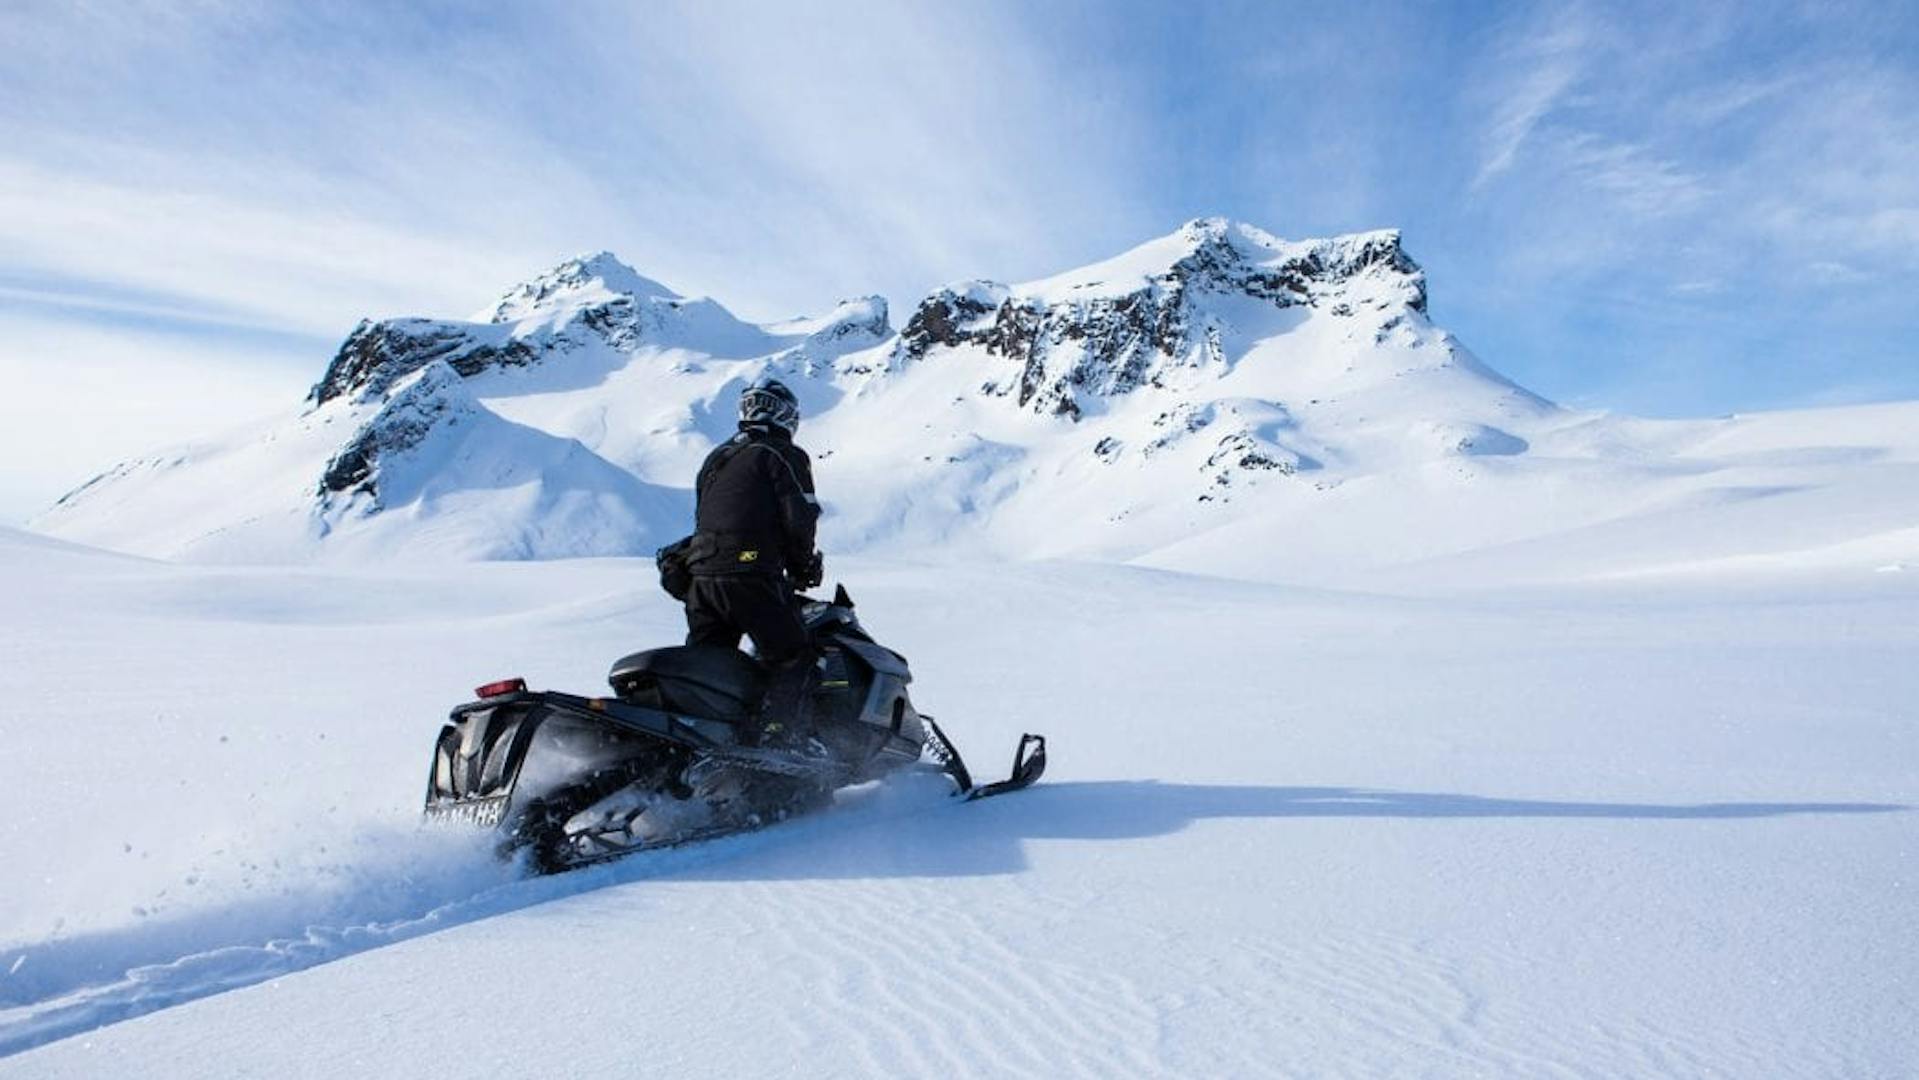 A man is standing while driving a snowmobile fast over an icy glacier toward a snowy mountaintop.